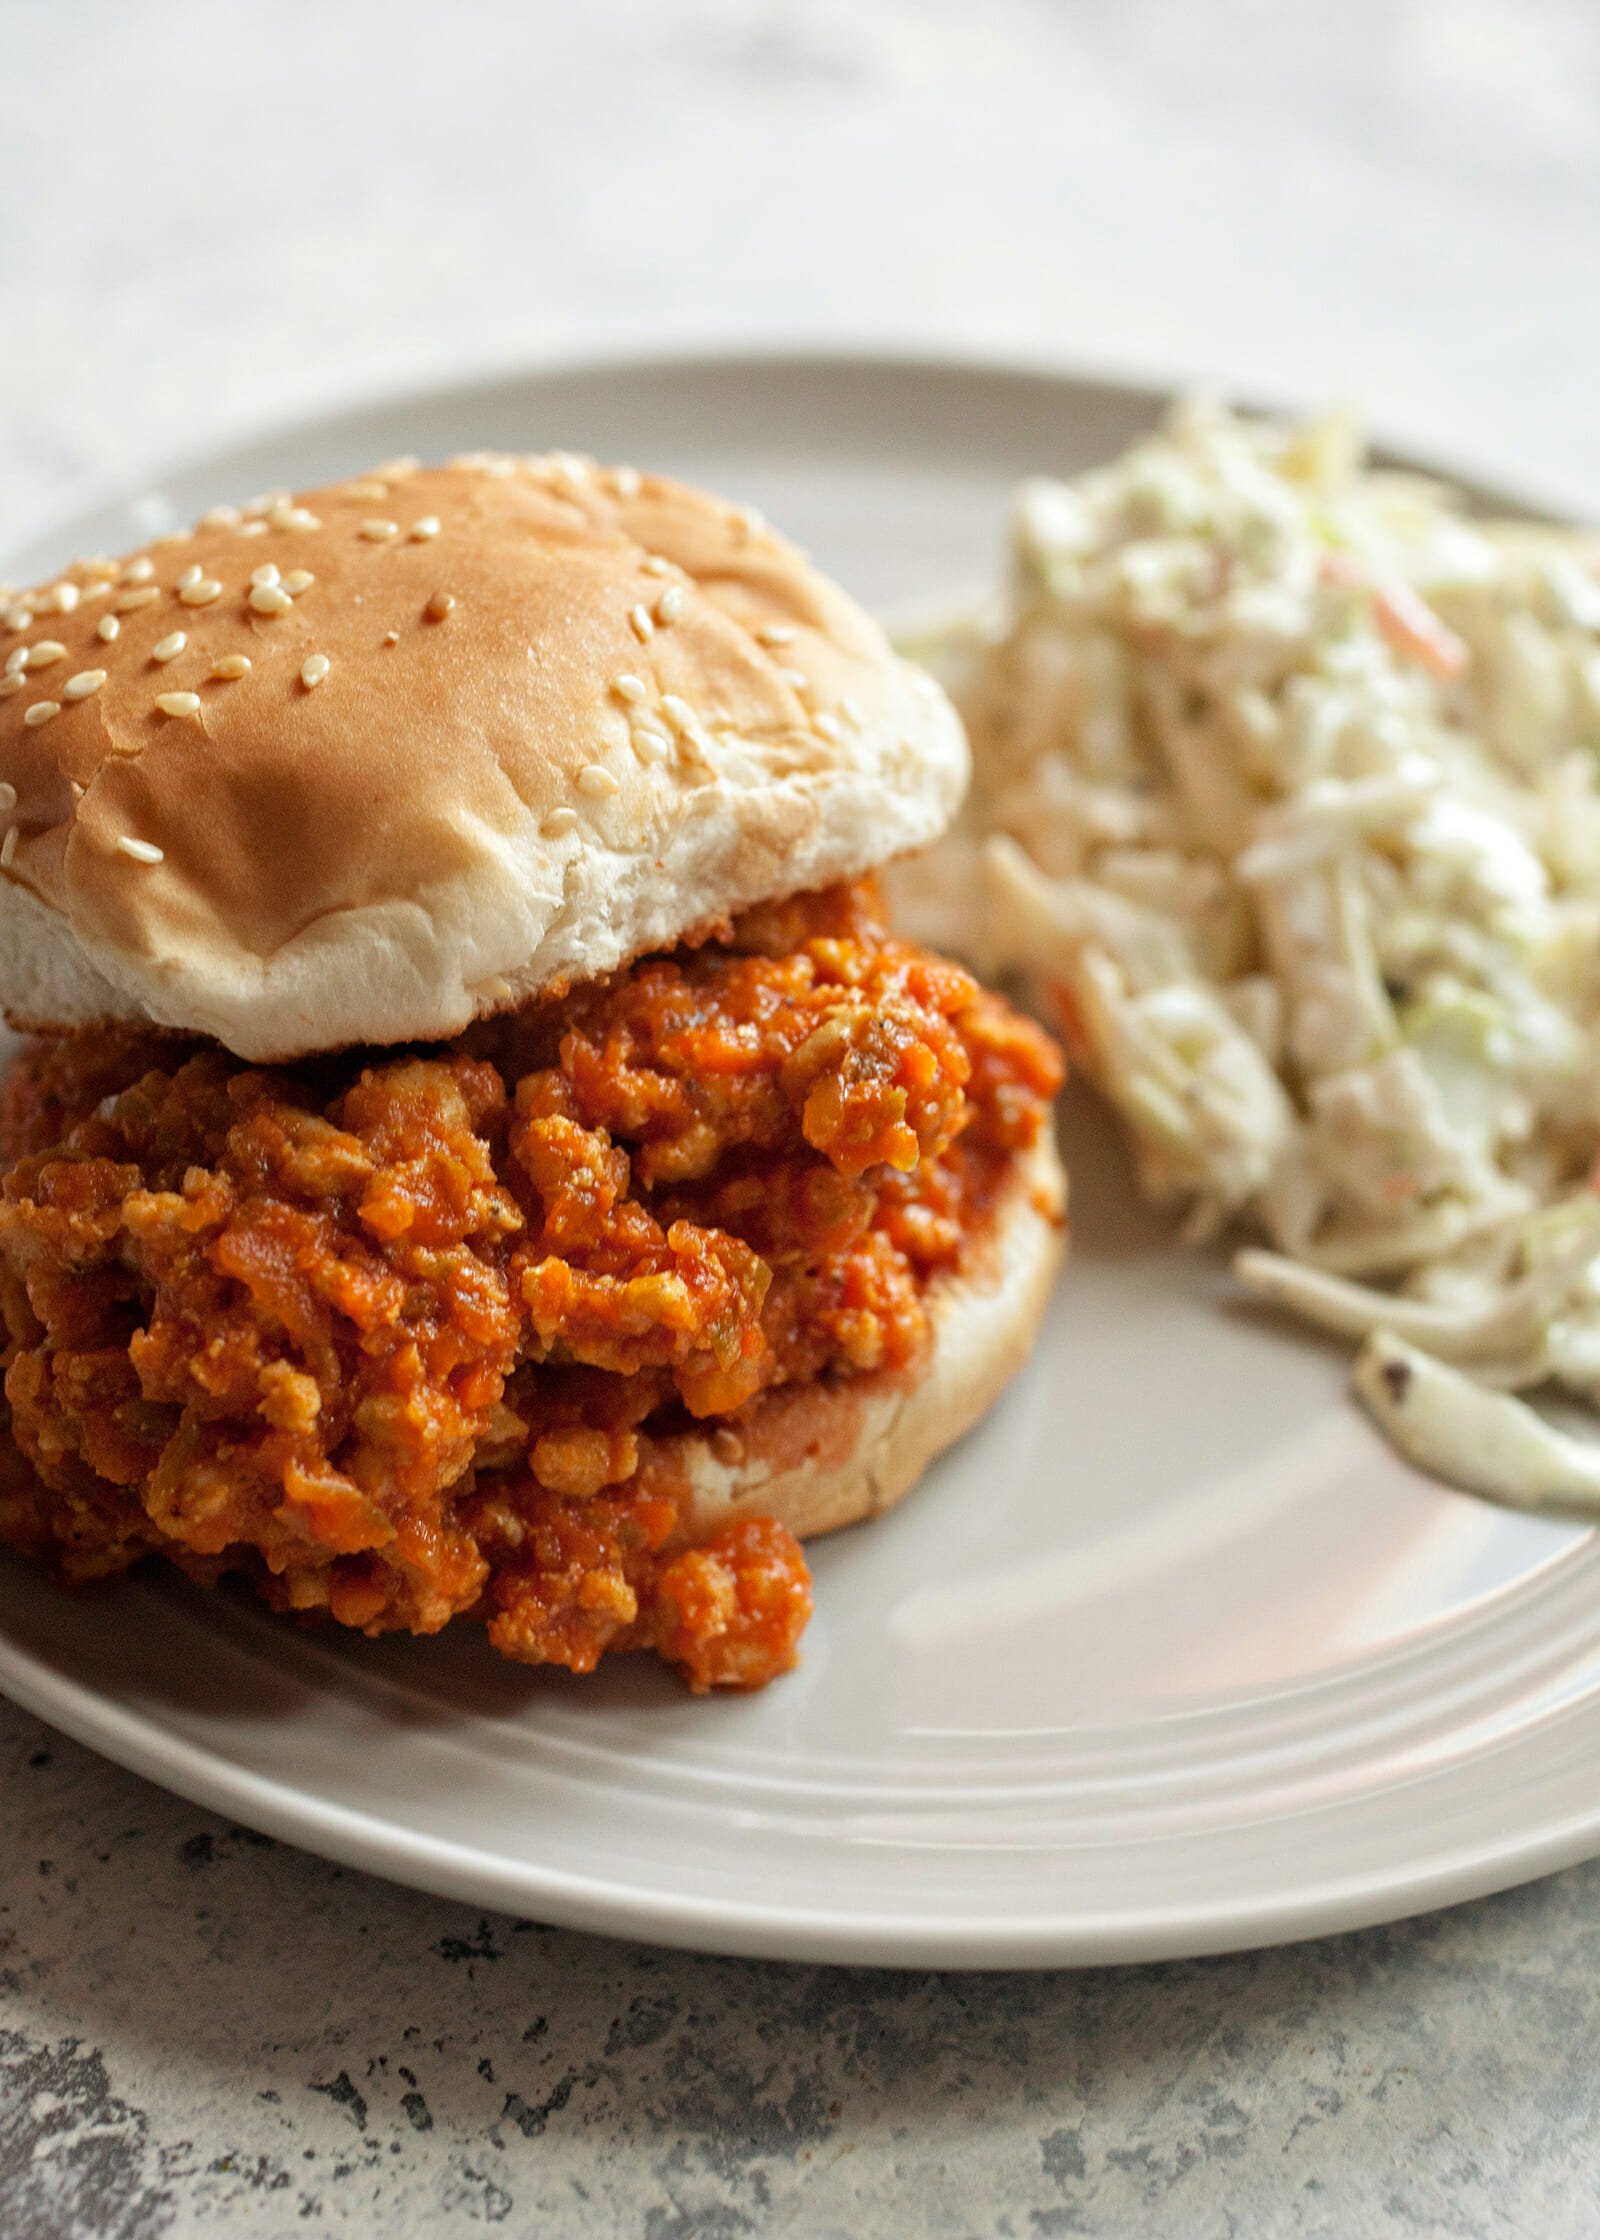 How to Make Sloppy Joes with Turkey